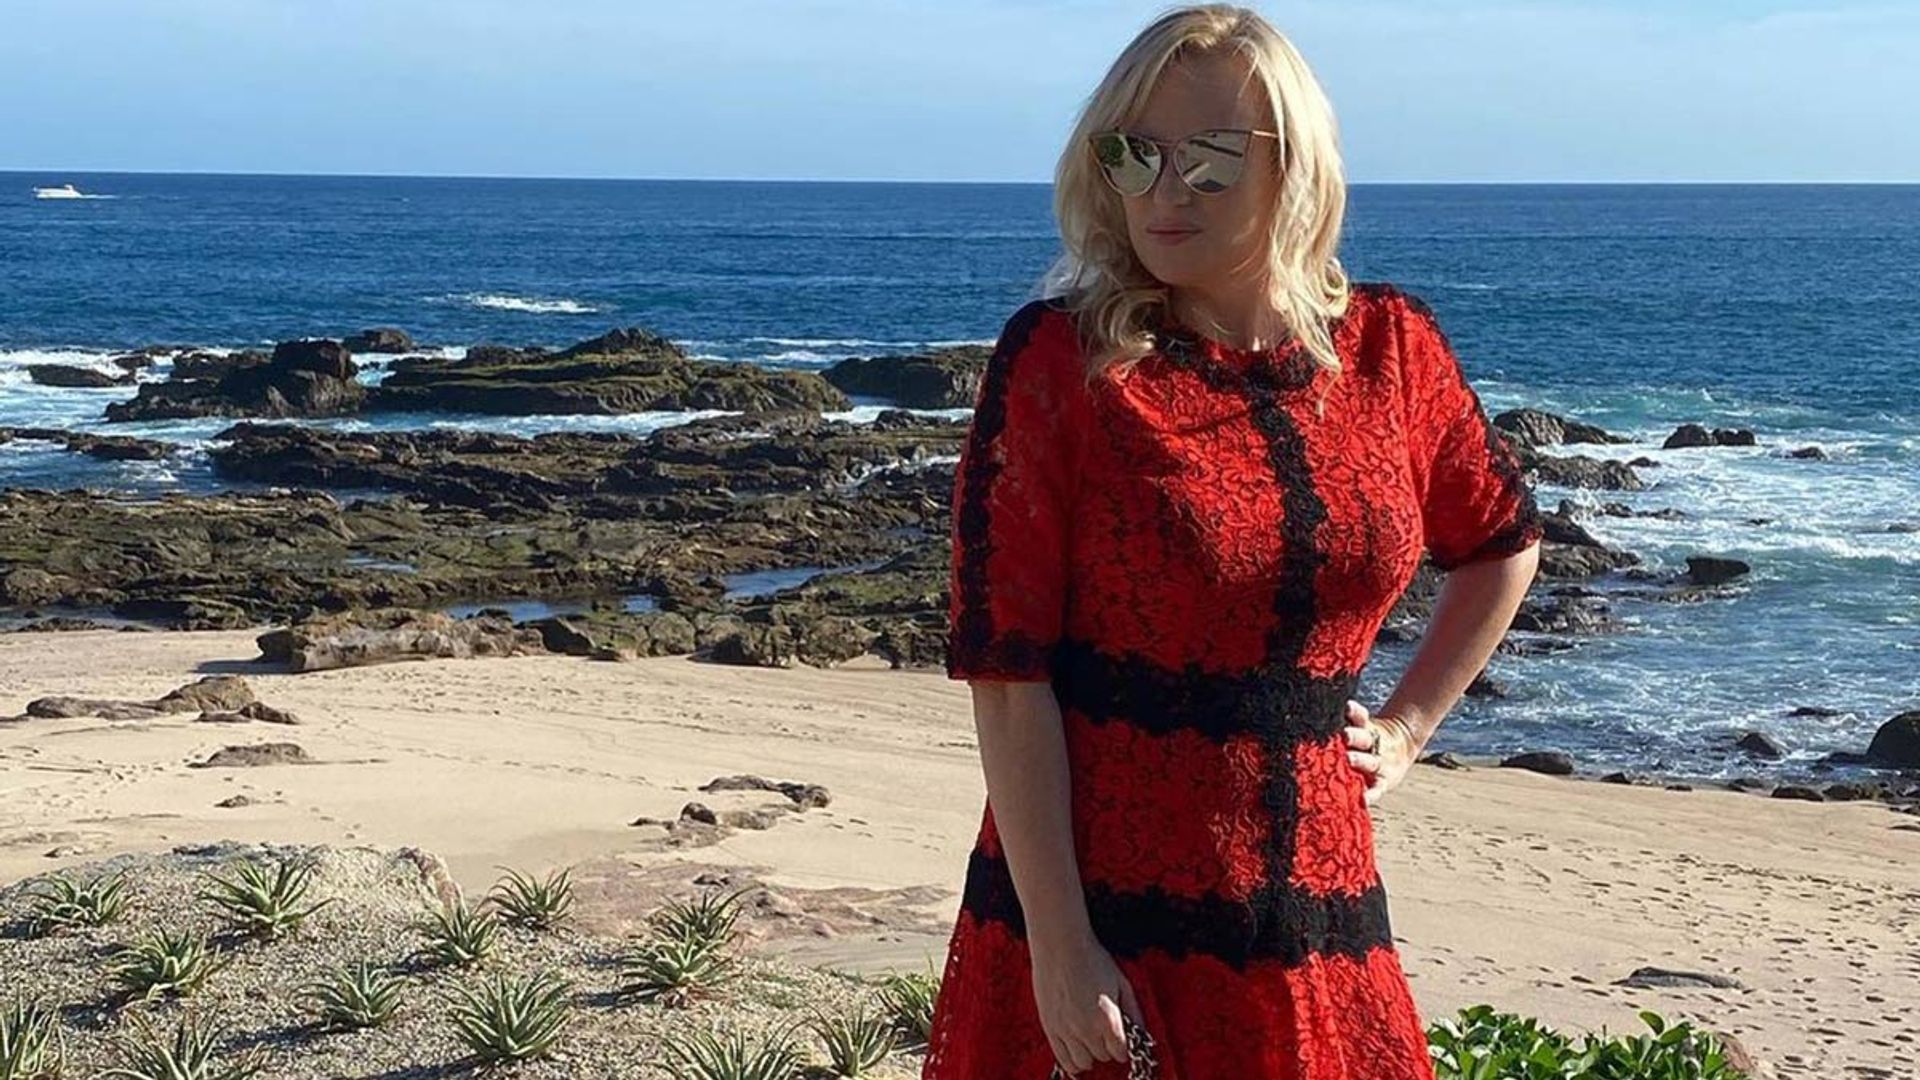 Rebel Wilson details disastrous date that ended in an ocean rescue ...